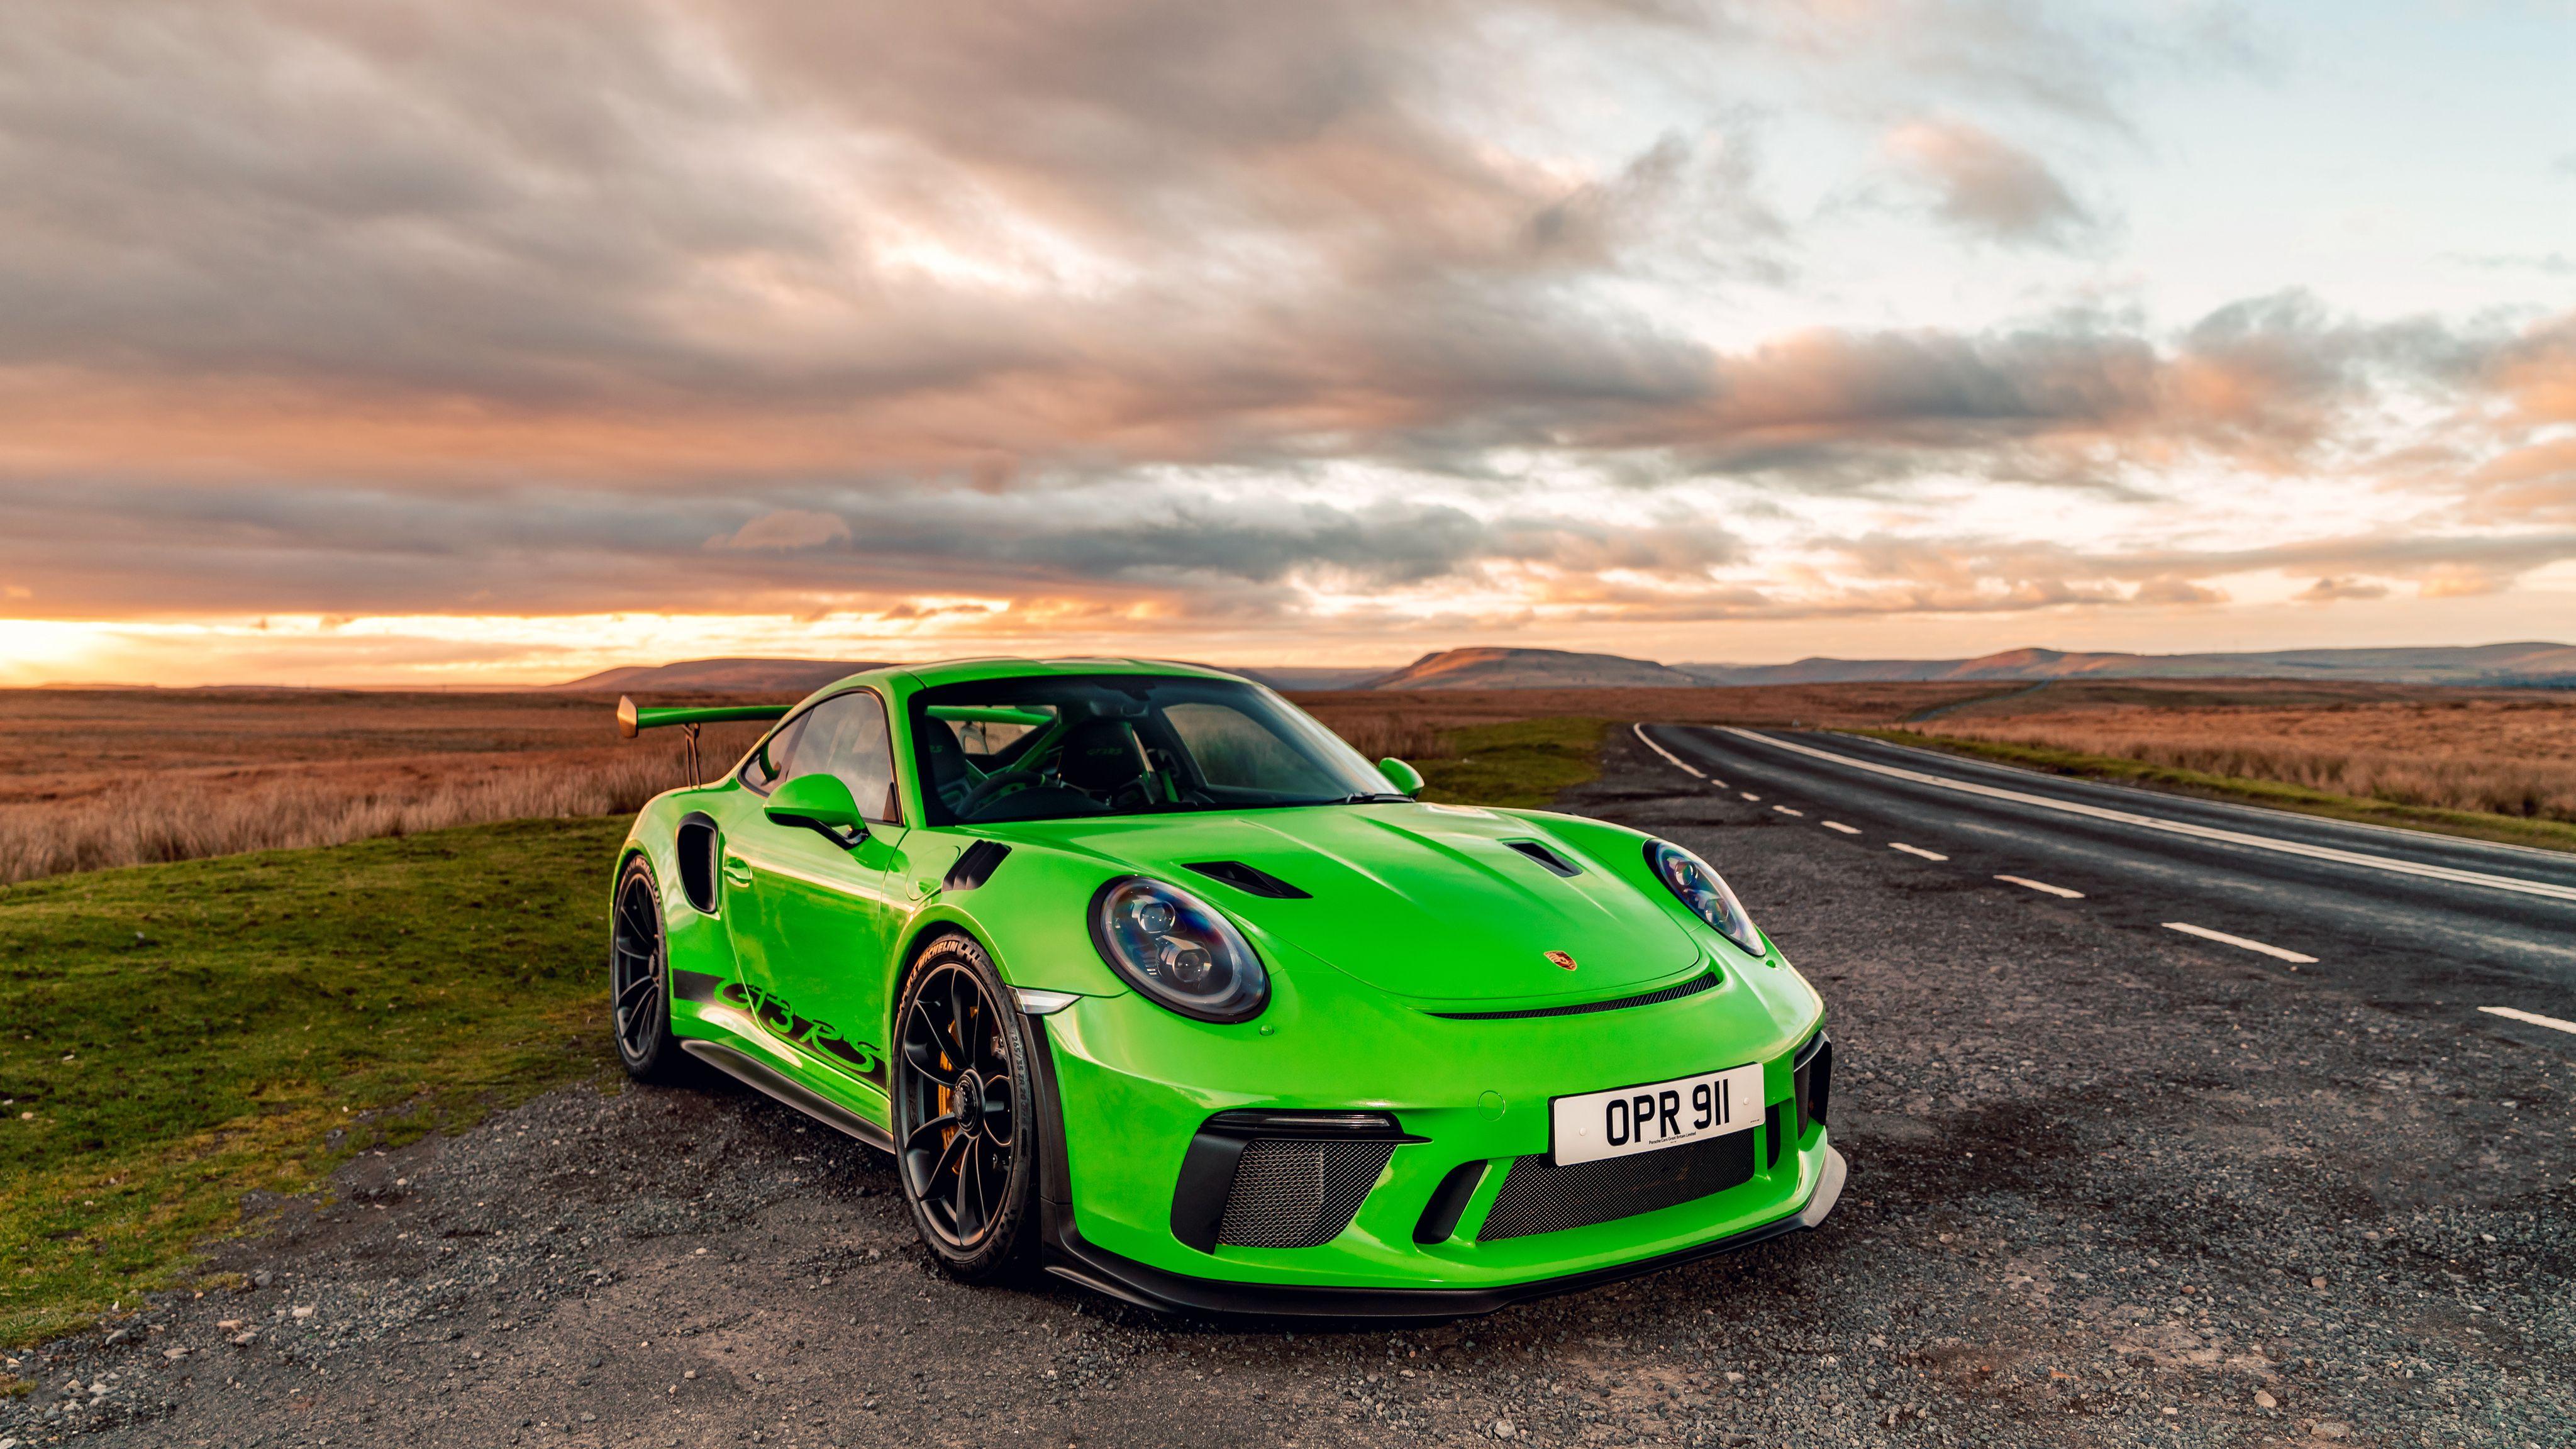 911 Gt3 Rs Wallpapers Top Free 911 Gt3 Rs Backgrounds Wallpaperaccess